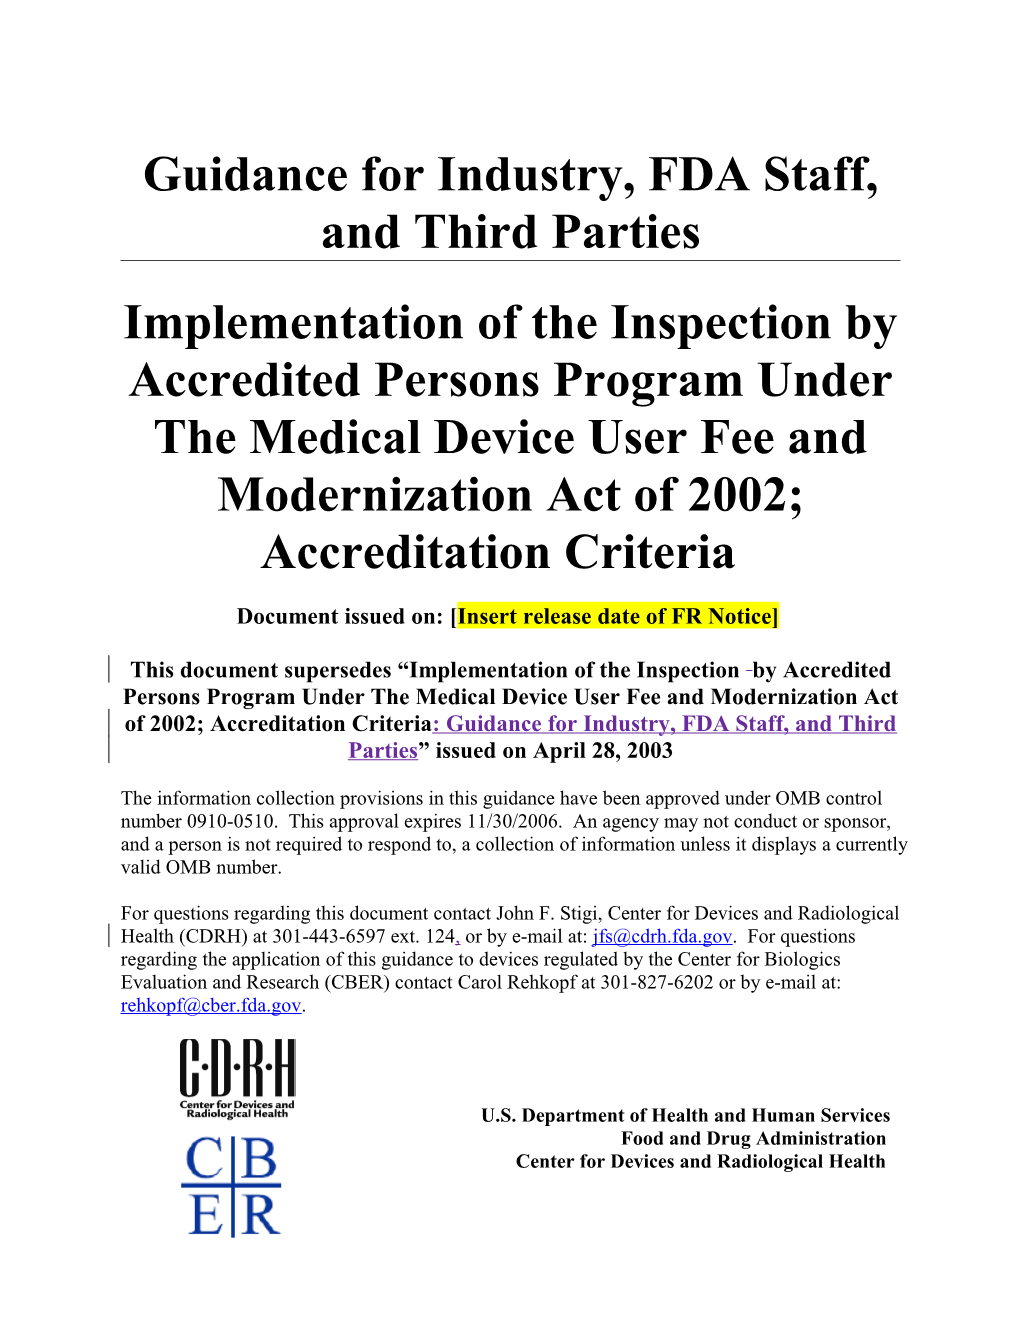 Implementation of the Inspection by Accredited Persons Program Under the Medical Device